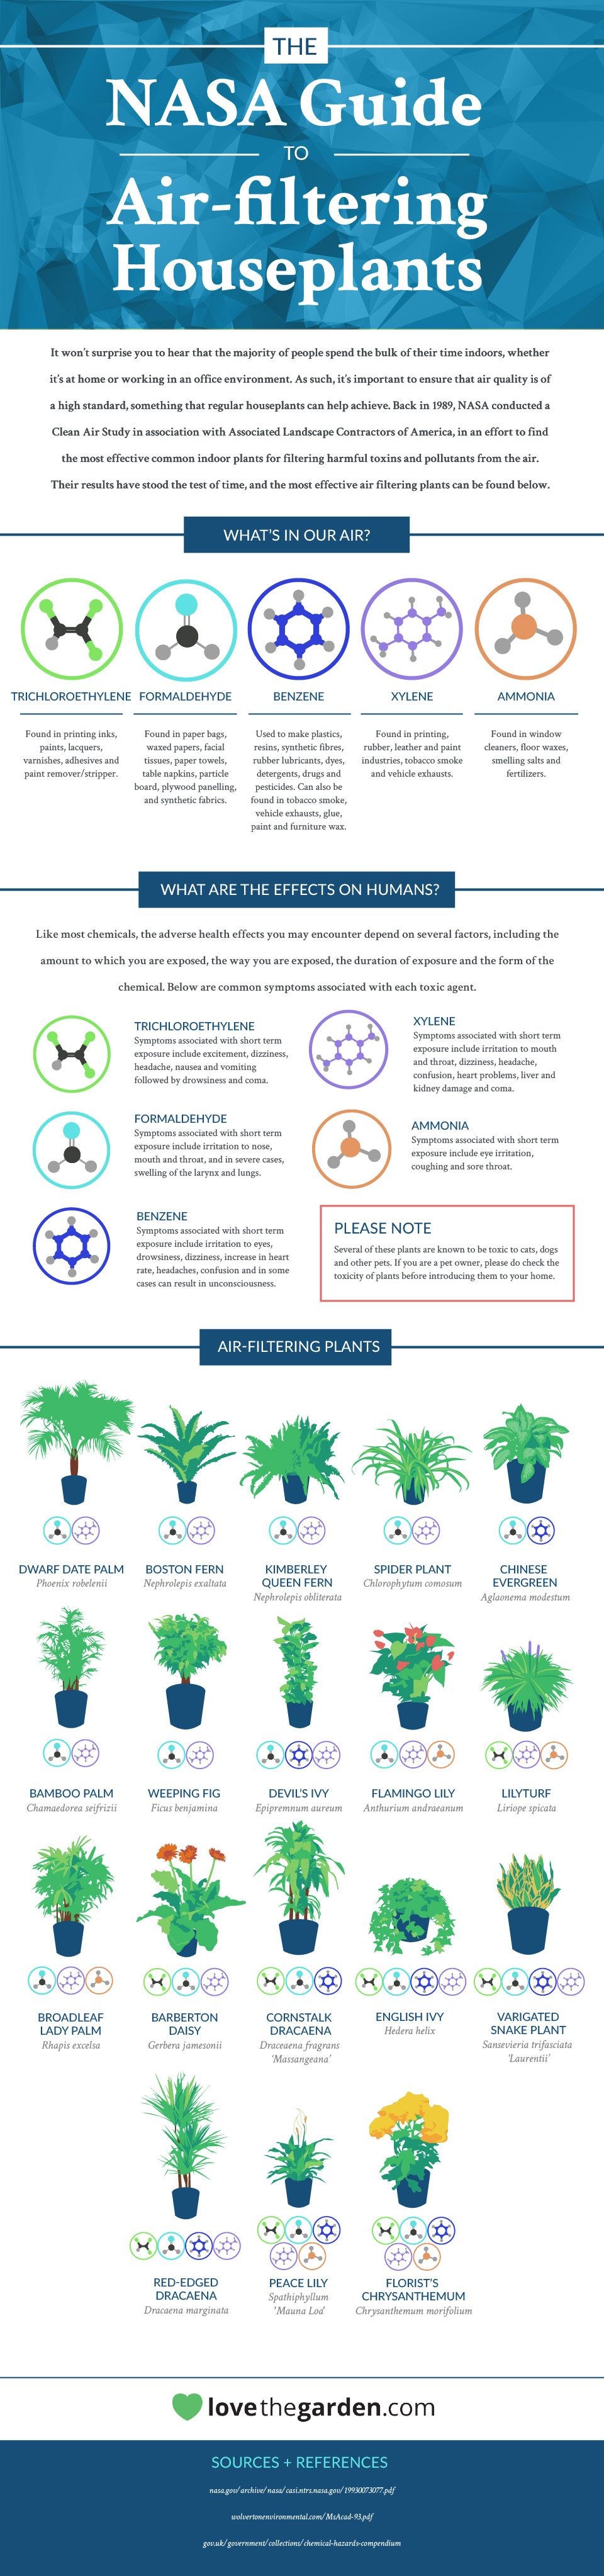 The NASA Guide to Air-filtering Houseplants